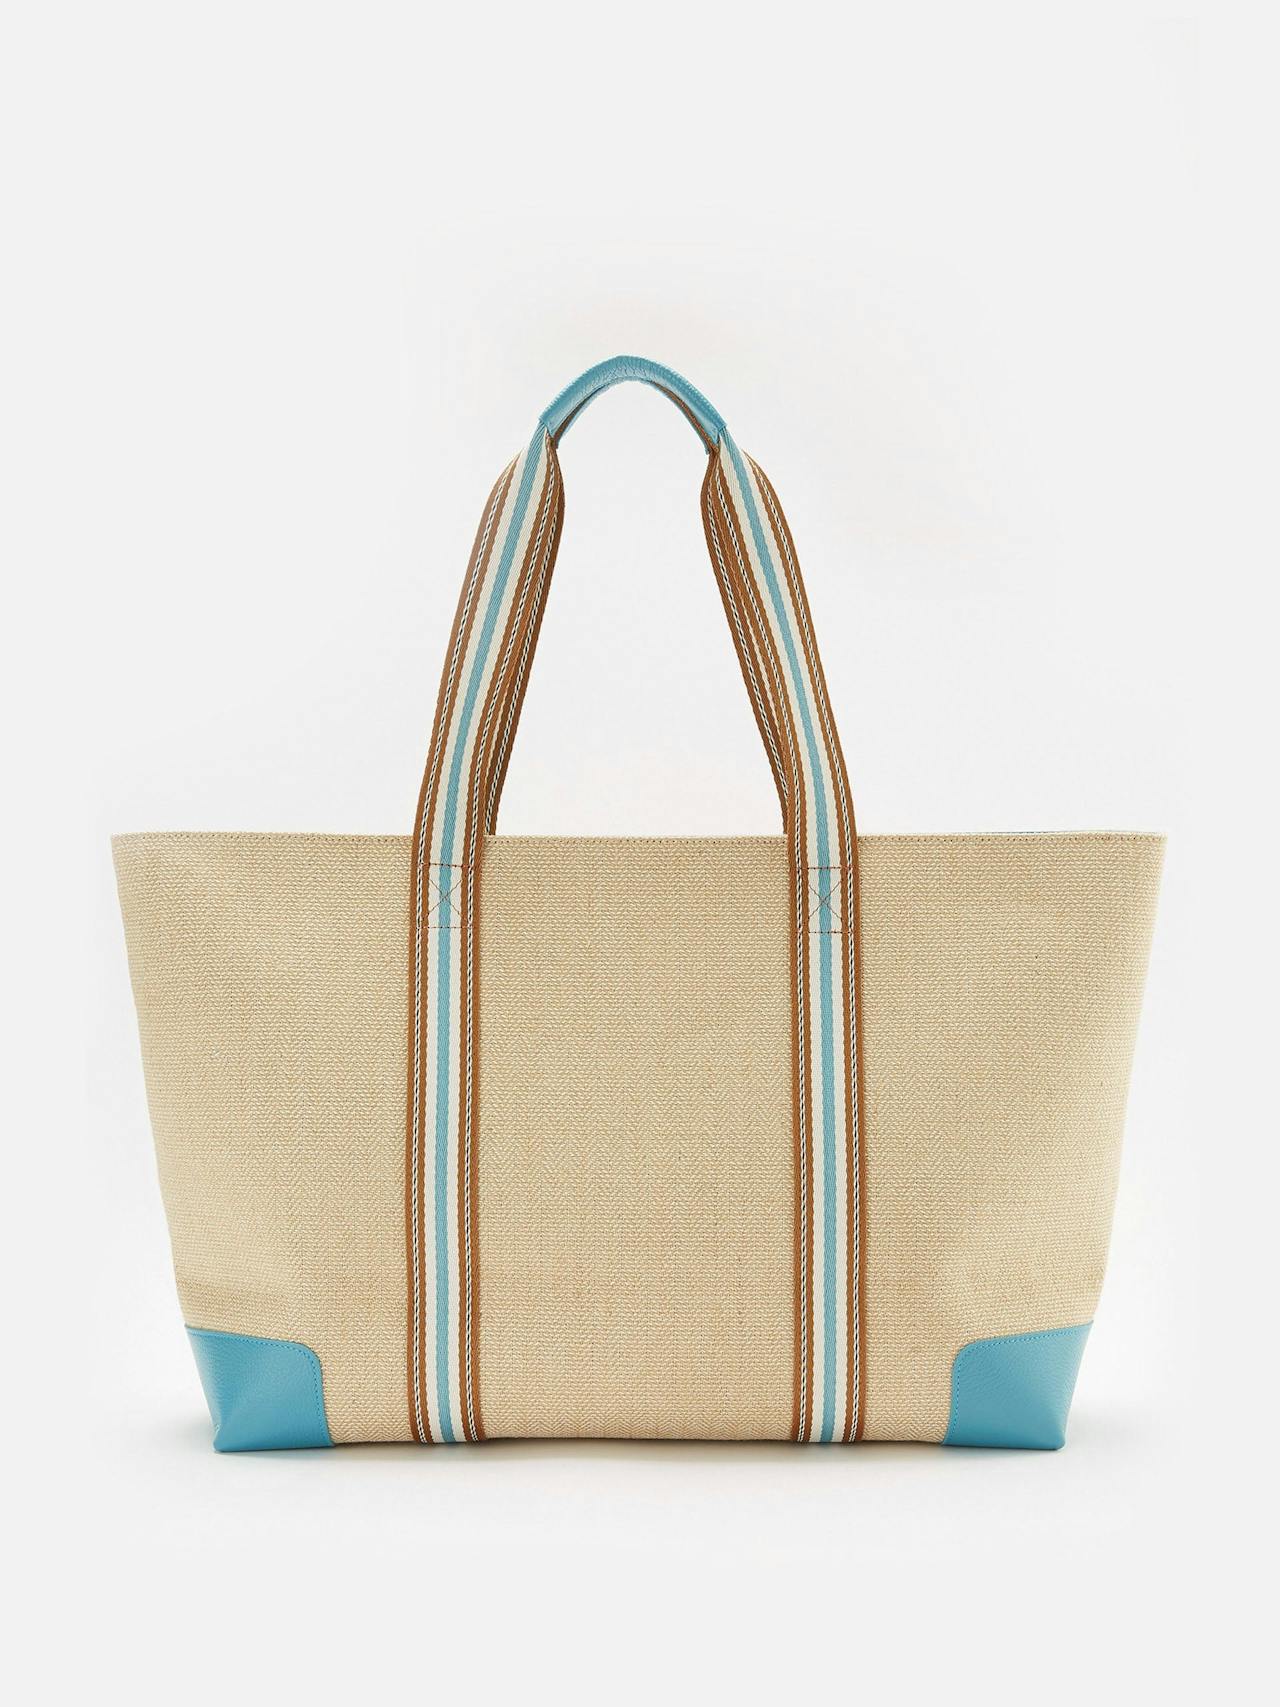 The Luxe beach bag in tropicana teal